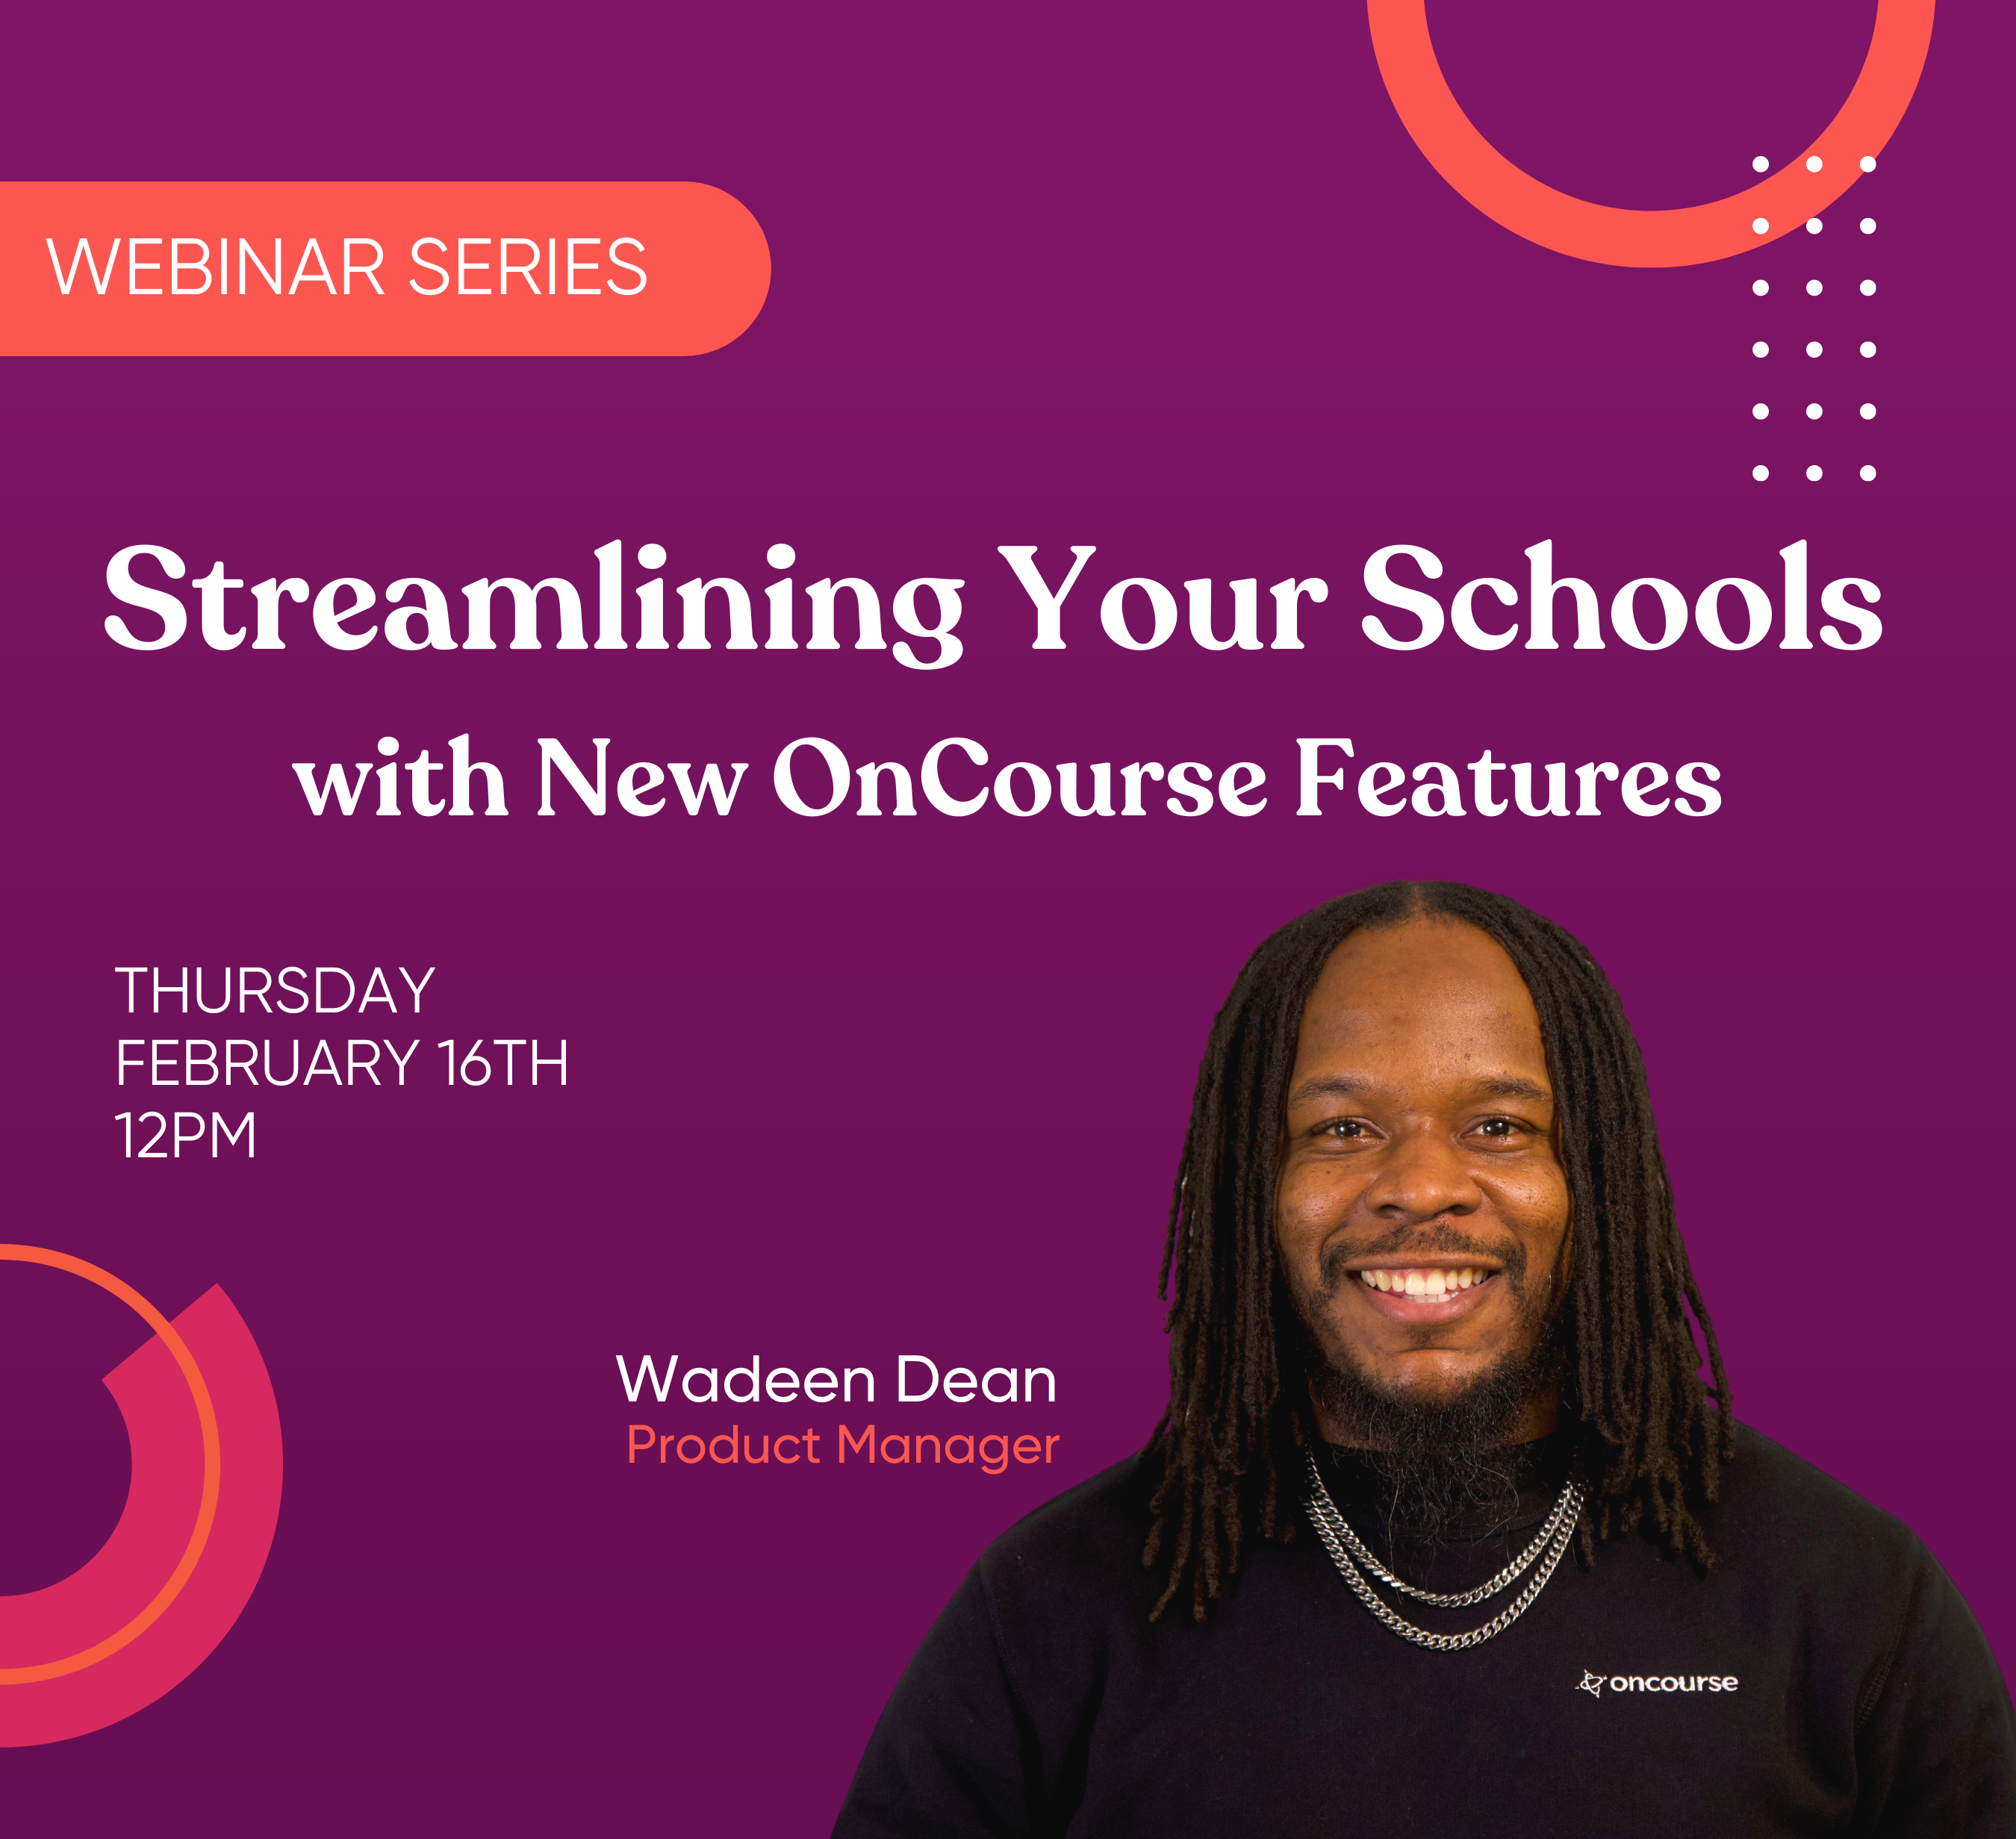 Promotion for webinar series called Streaming Your Schools with New OnCourse Features.